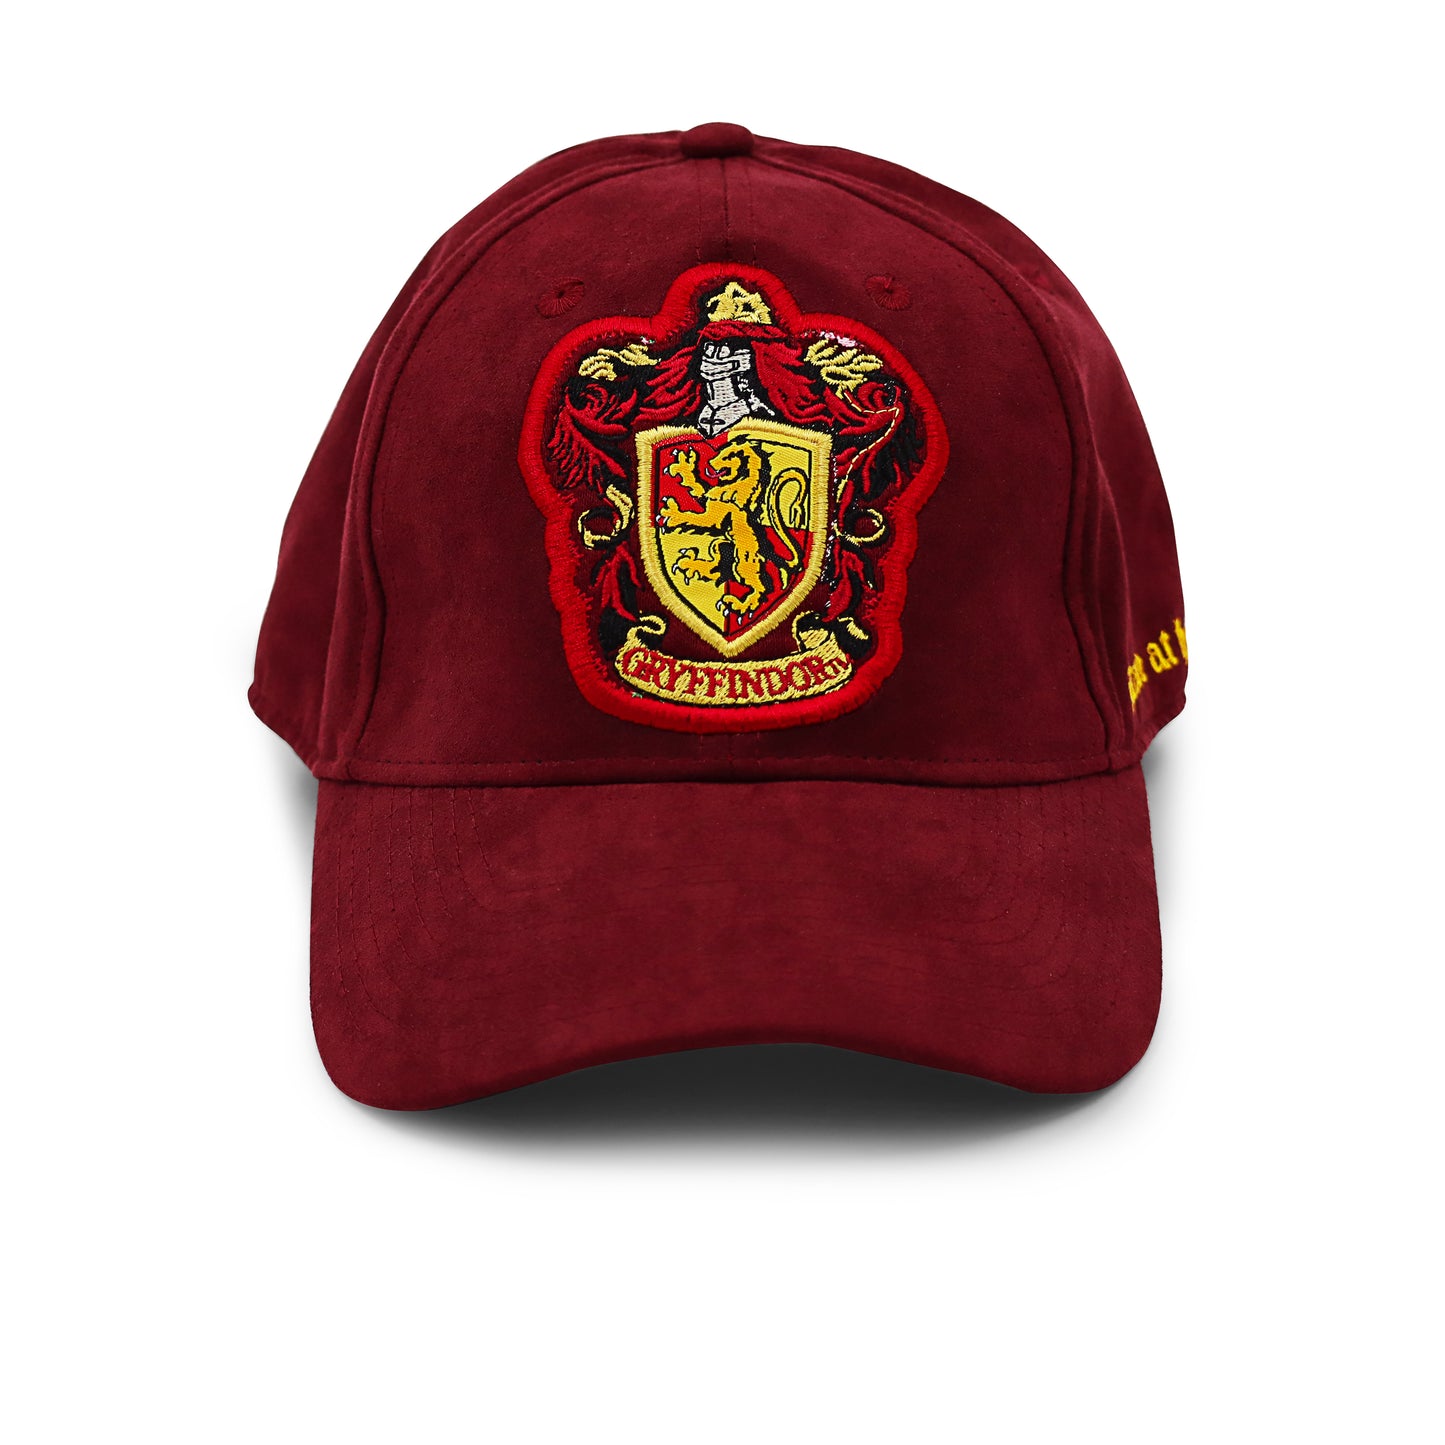 Harry Potter Gryffindor cap in maroon colour